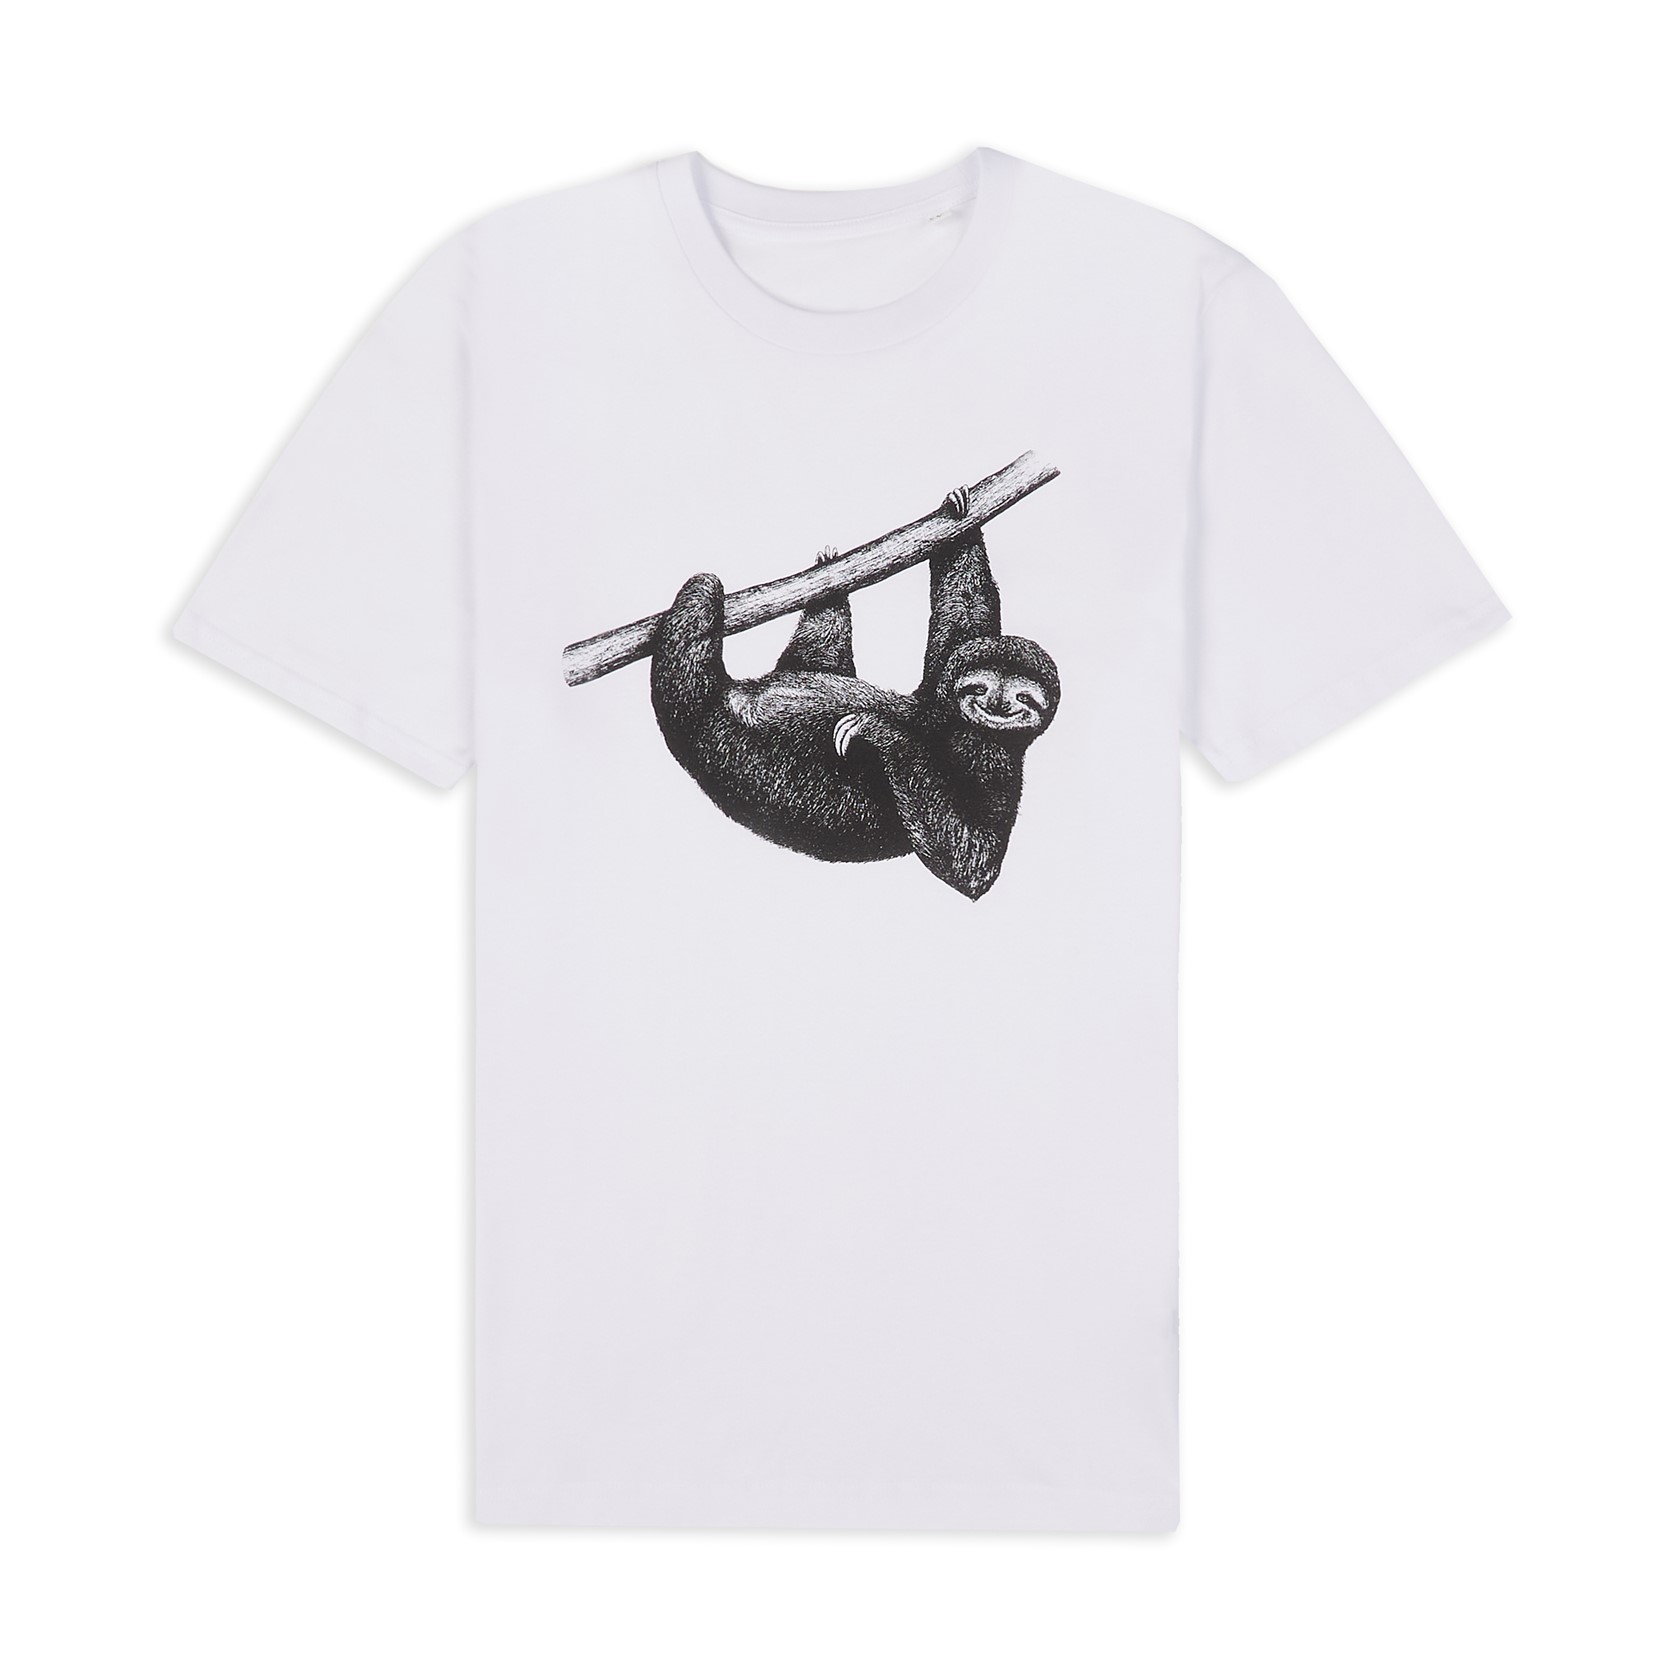 Brown-throated Sloth T-Shirt